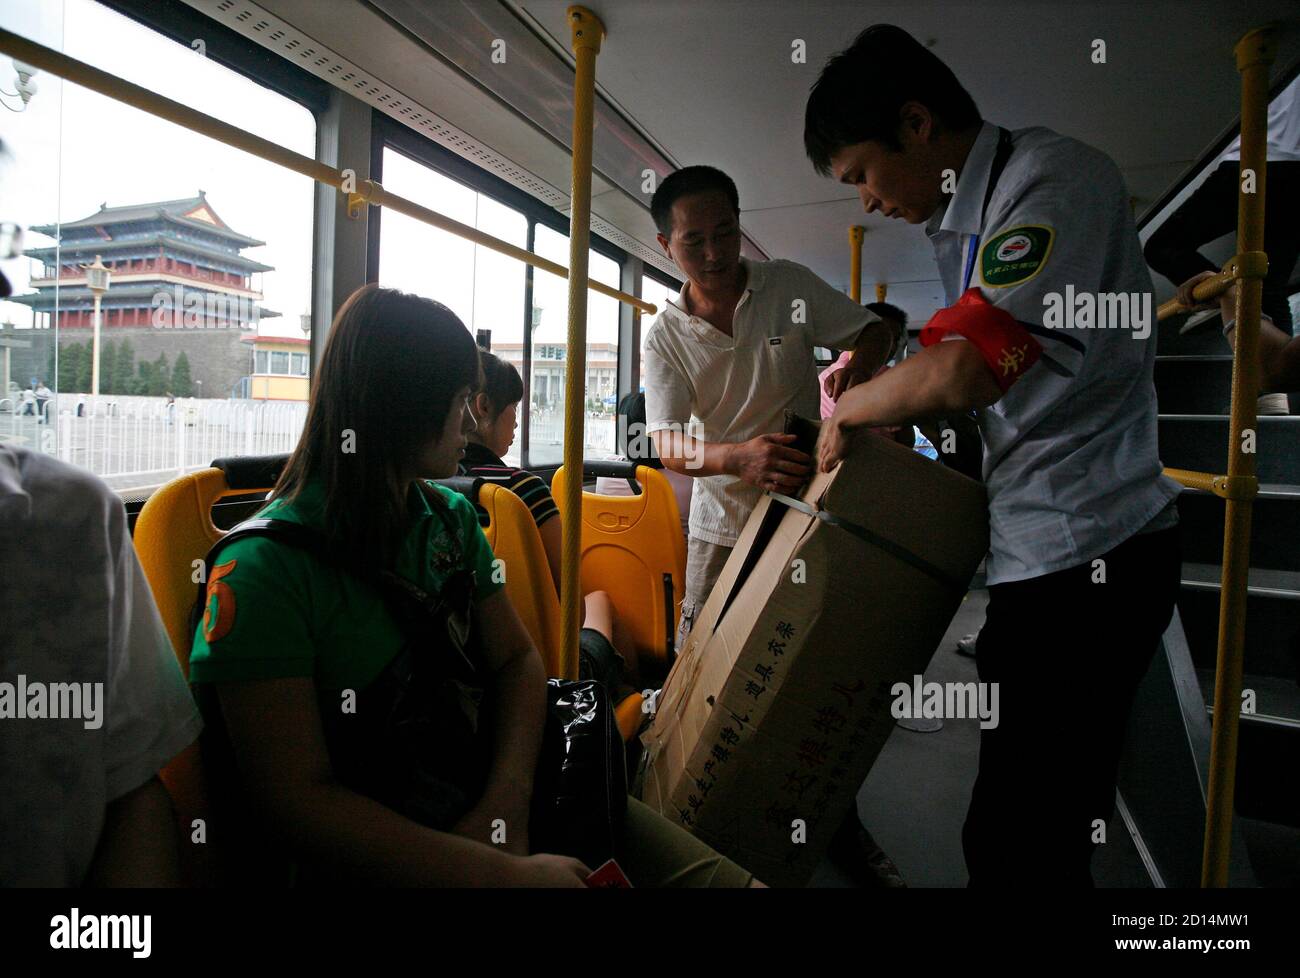 A bus conductor checks a passenger's bag on a bus at the Qianmen district in Beijing August 1, 2008. Bus conductors began checks on passngers' belongings on Friday as part of heightened security ahead of the Beijing Olympics that will begin August 8.    REUTERS/Alvin Chan (CHINA) (BEIJING 2008 OLYMPICS PREVIEW) Stock Photo